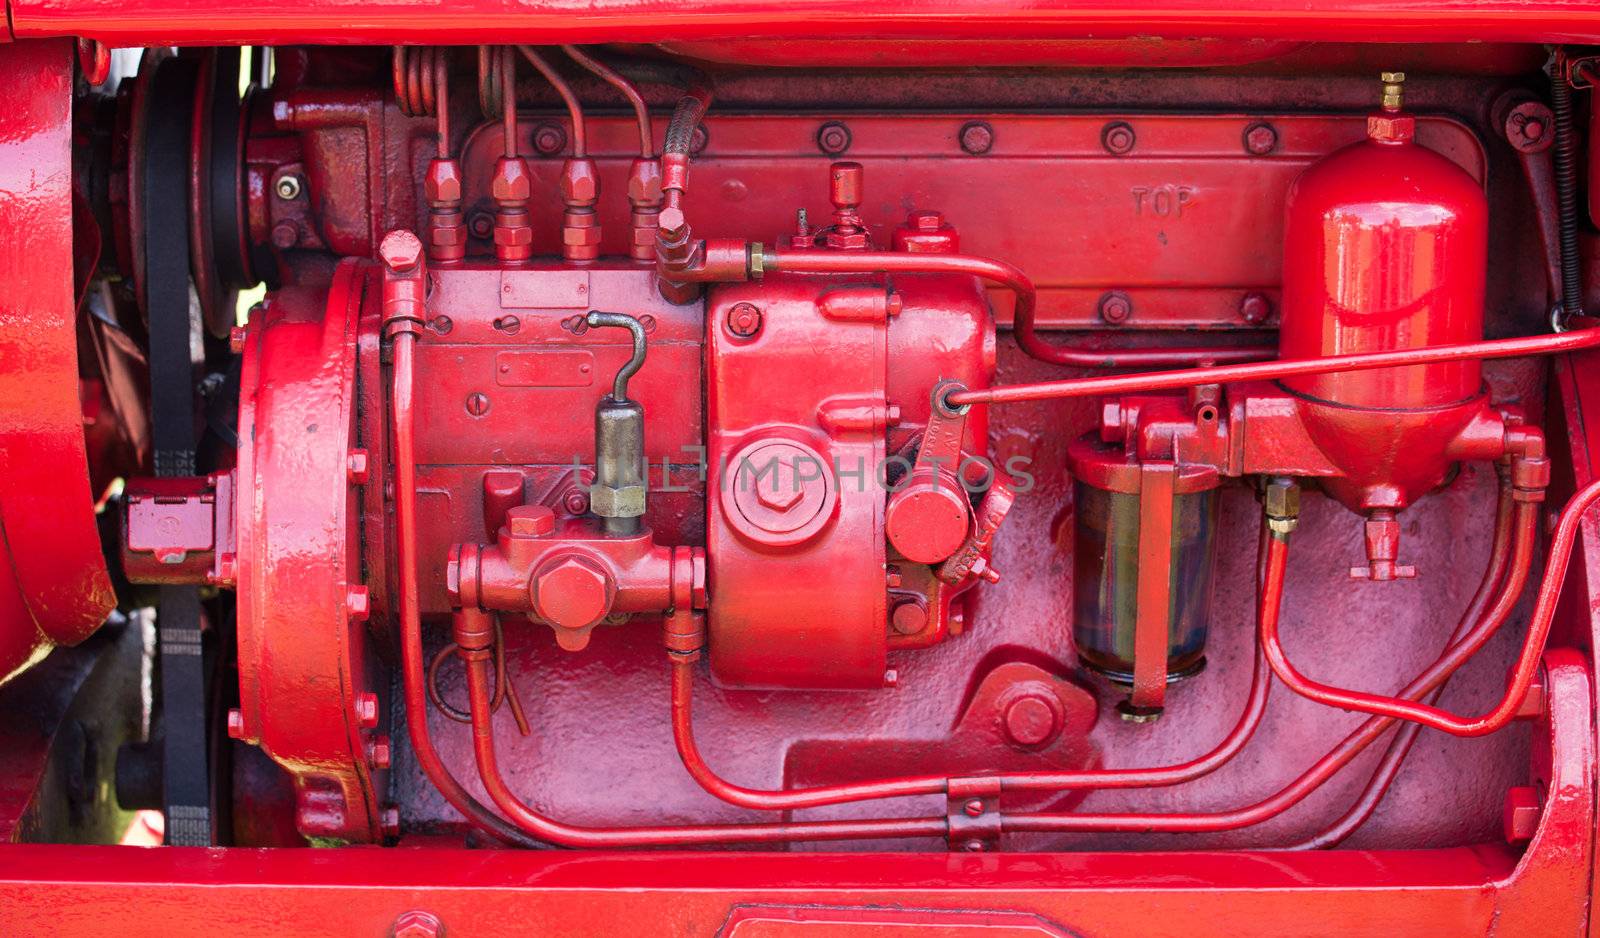 Red engine on old tractor by steheap